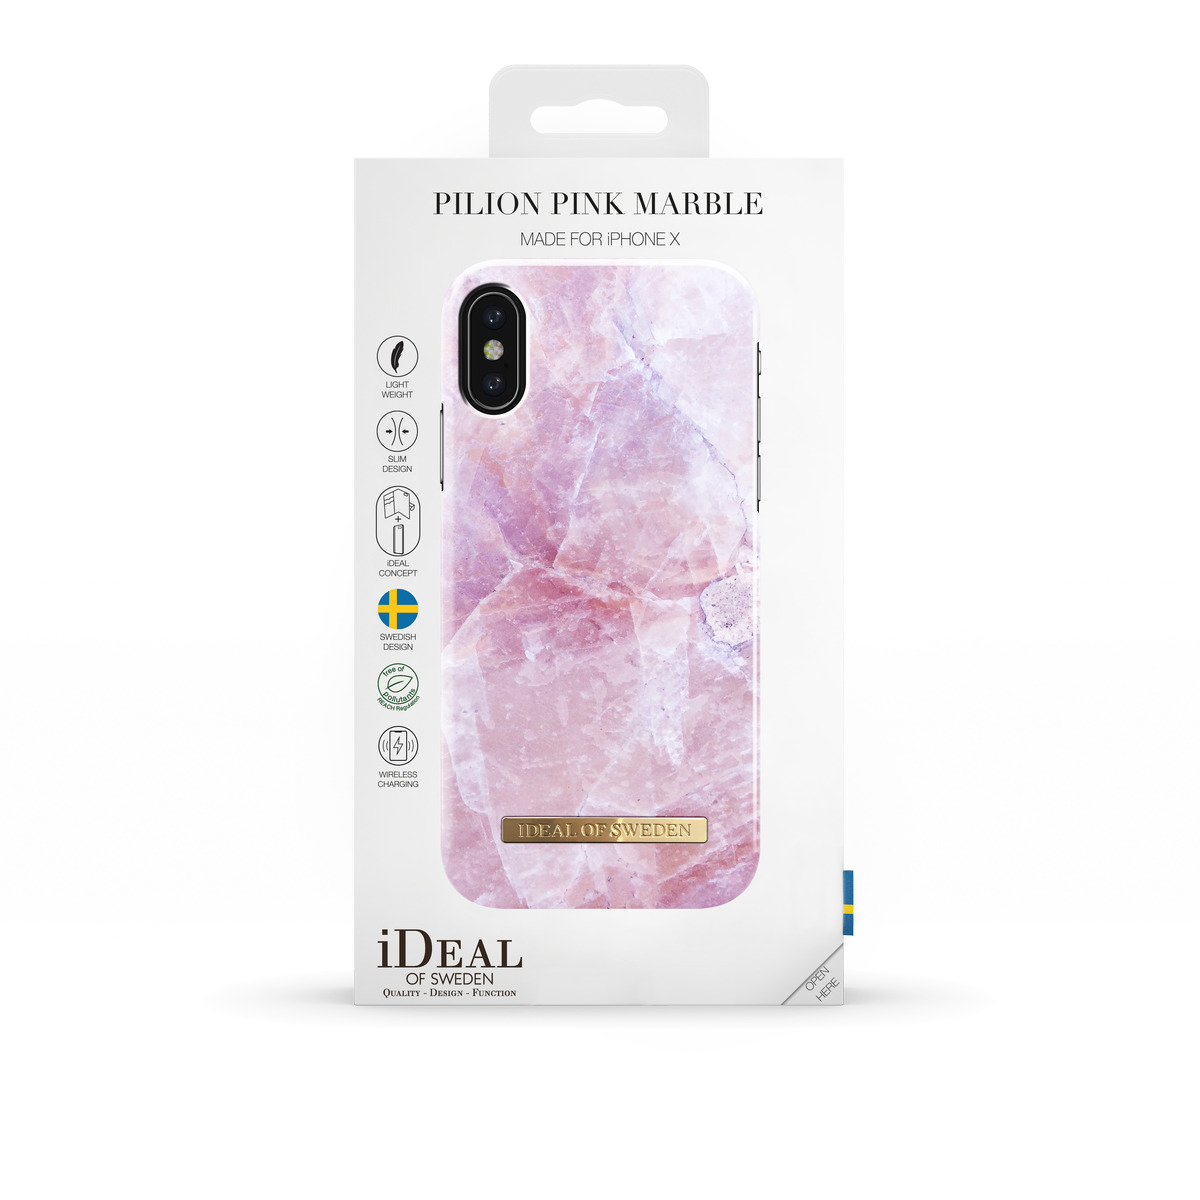 IDEAL OF Apple, Backcover, Pink iPhone X, Fashion, Marble SWEDEN